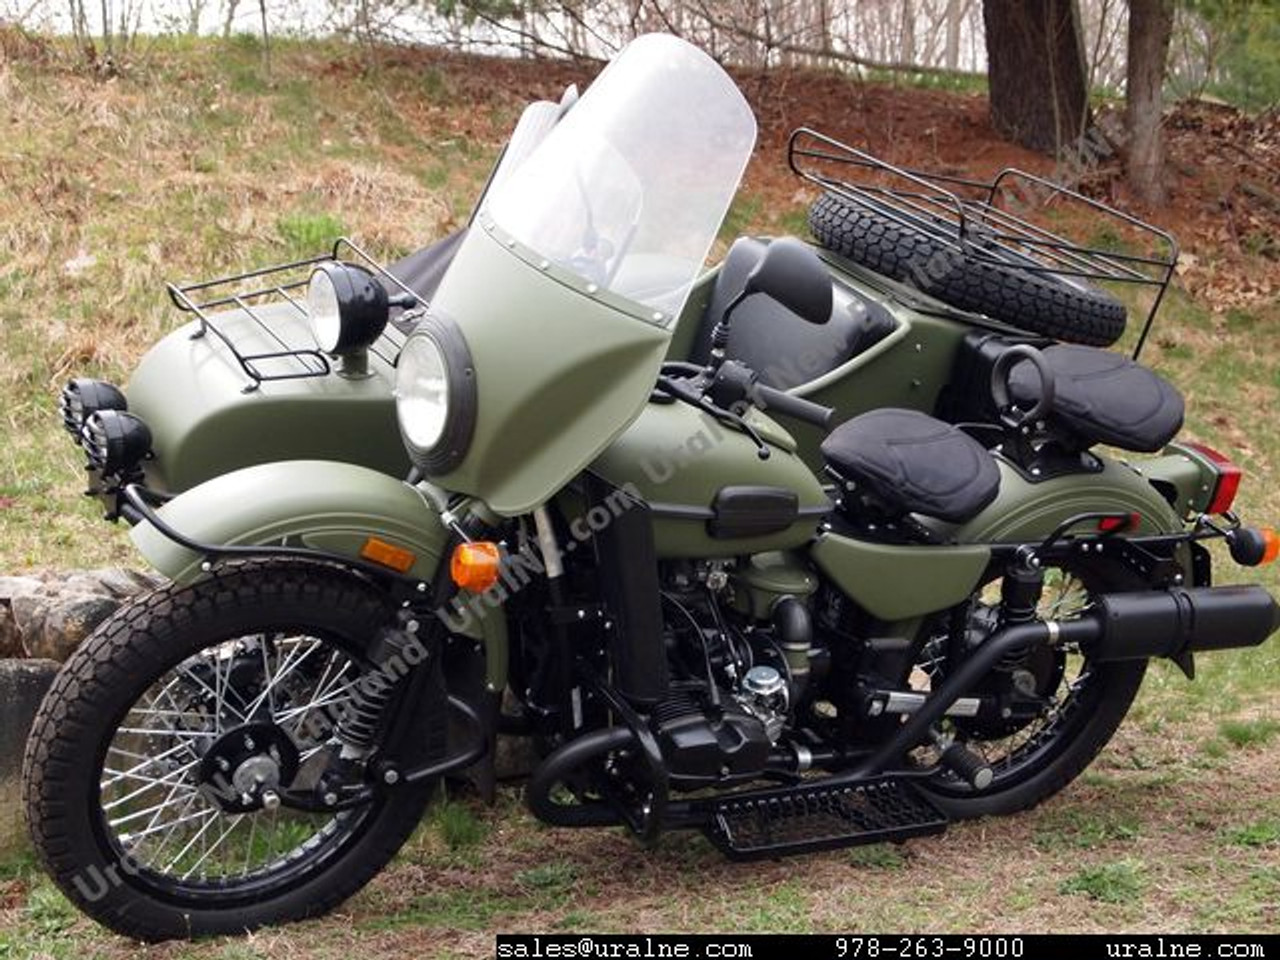 2012 Ural Gear-Up in "Taiga" Green with "Adventure" Package and Extras